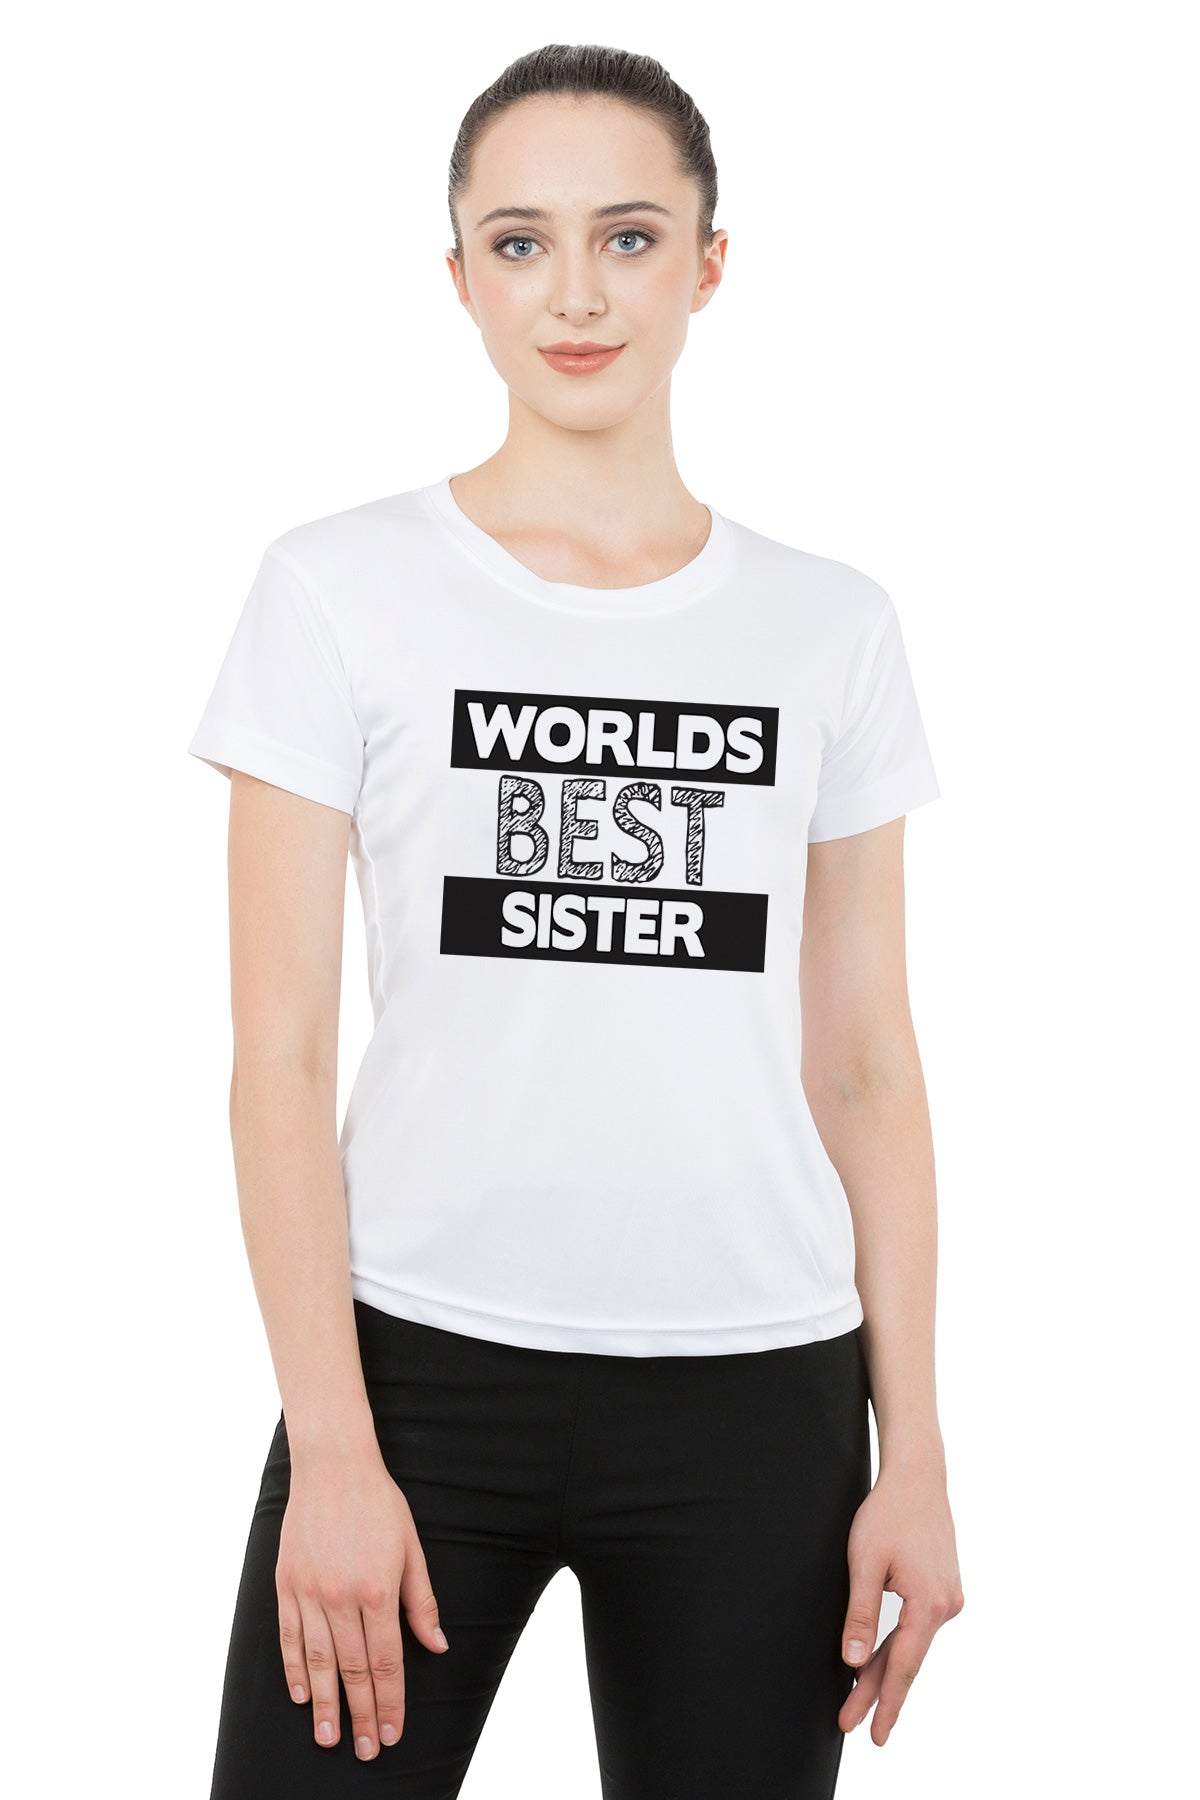 worlds best brother, worlds best sister matching Sibling t shirts - white